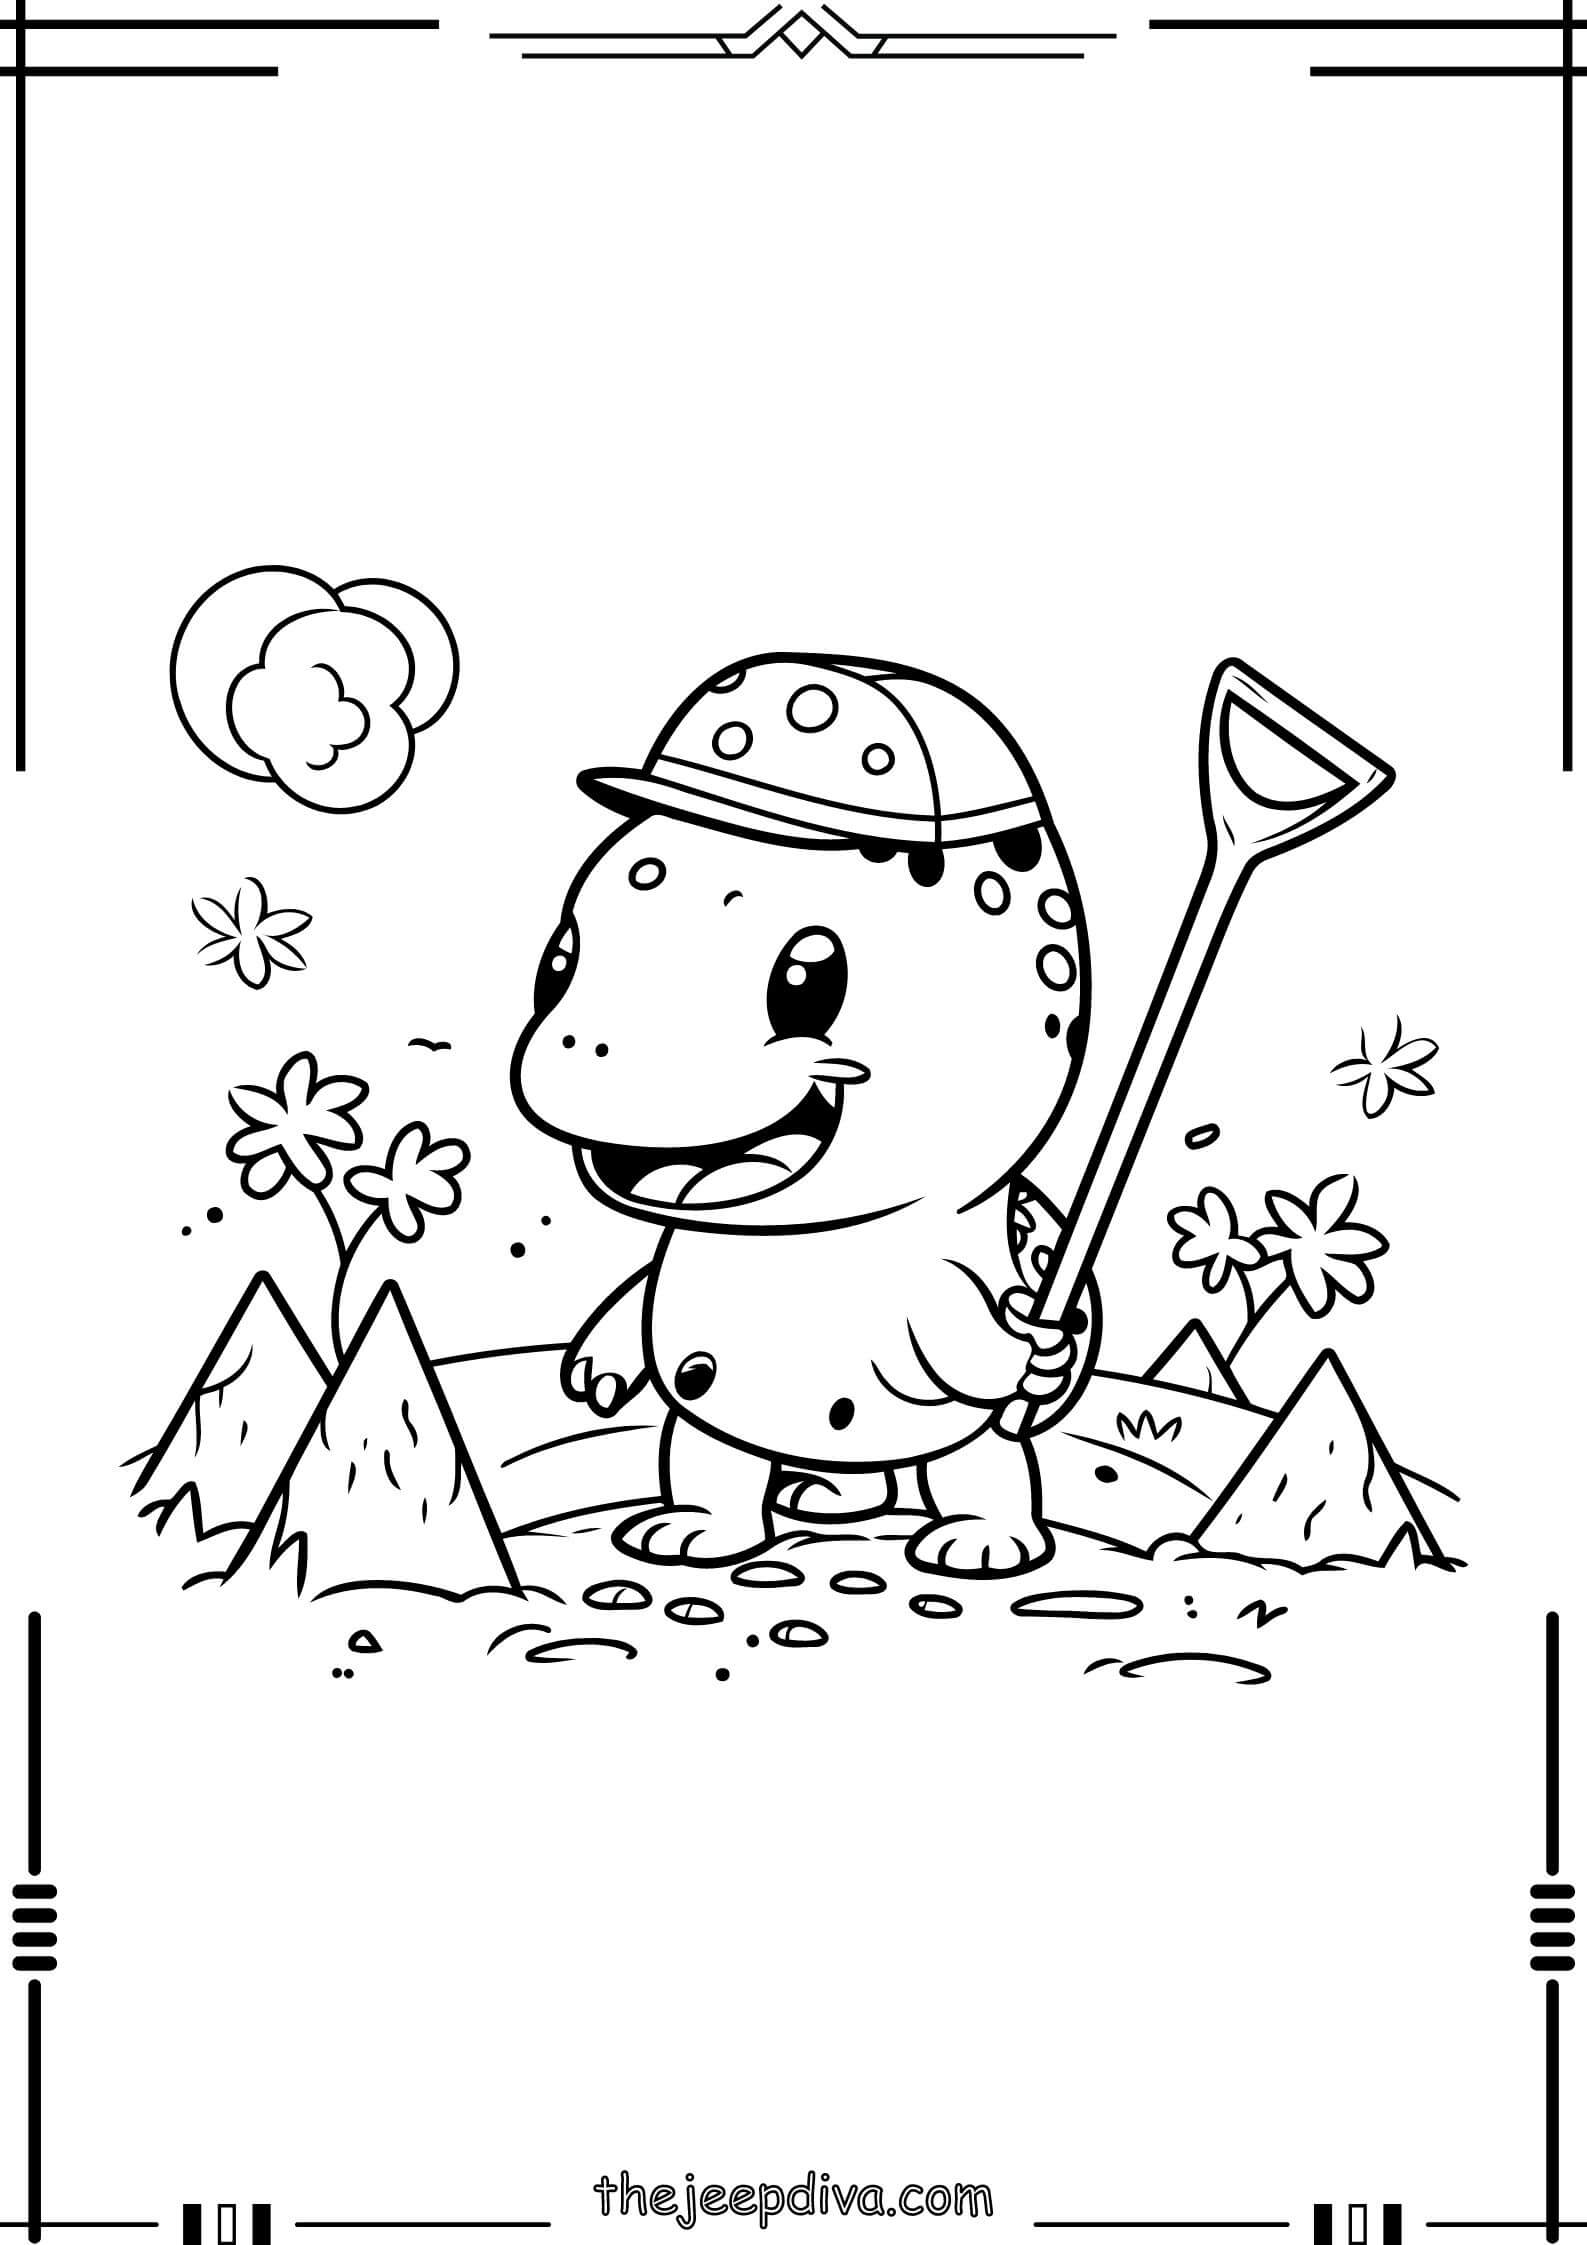 Dinosaur-Colouring-Pages-Easy-24